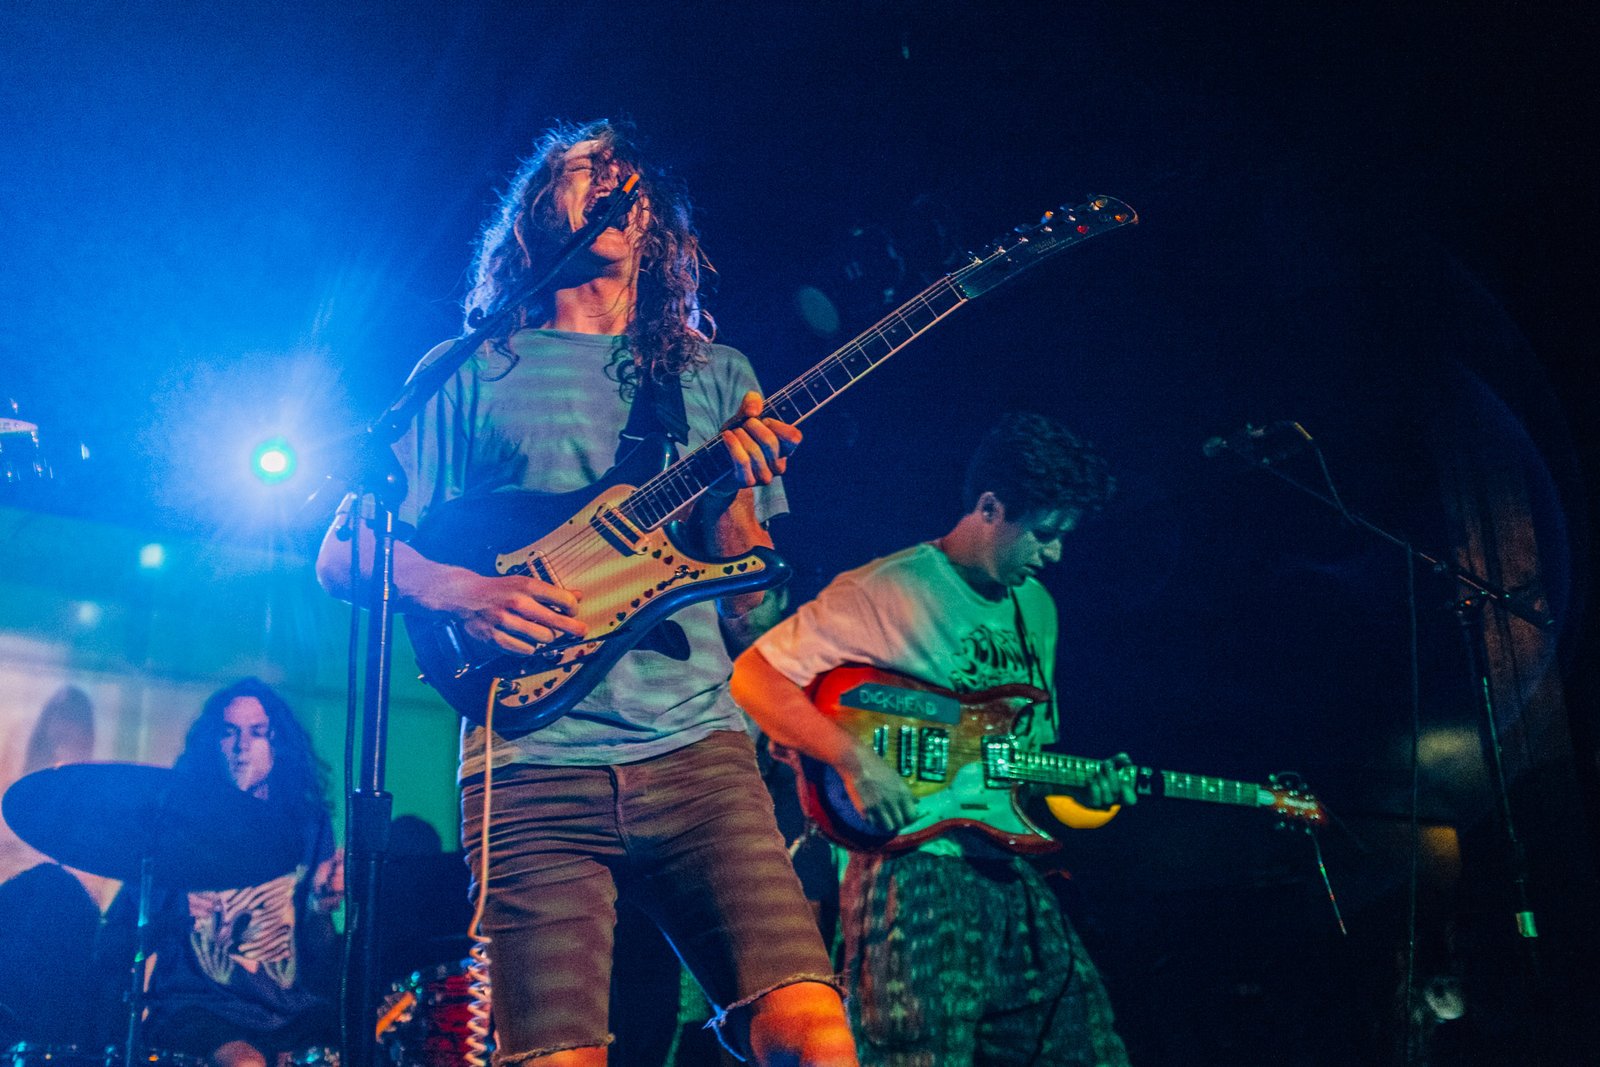 King Gizzard & the Lizard Wizard at The Echo